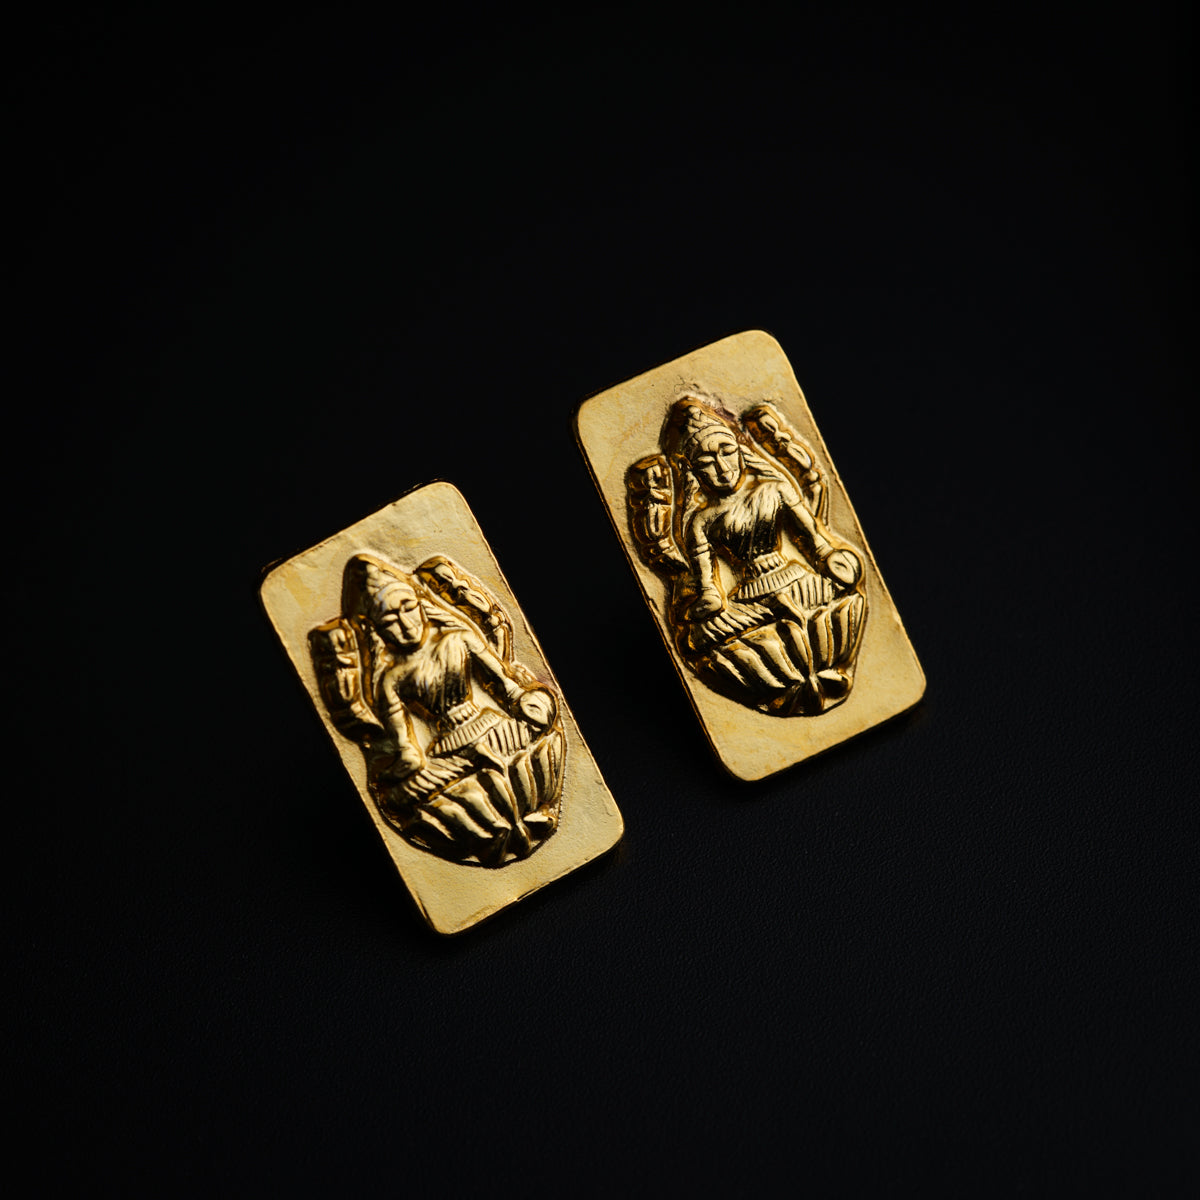 a pair of gold earrings with an image of a woman on it